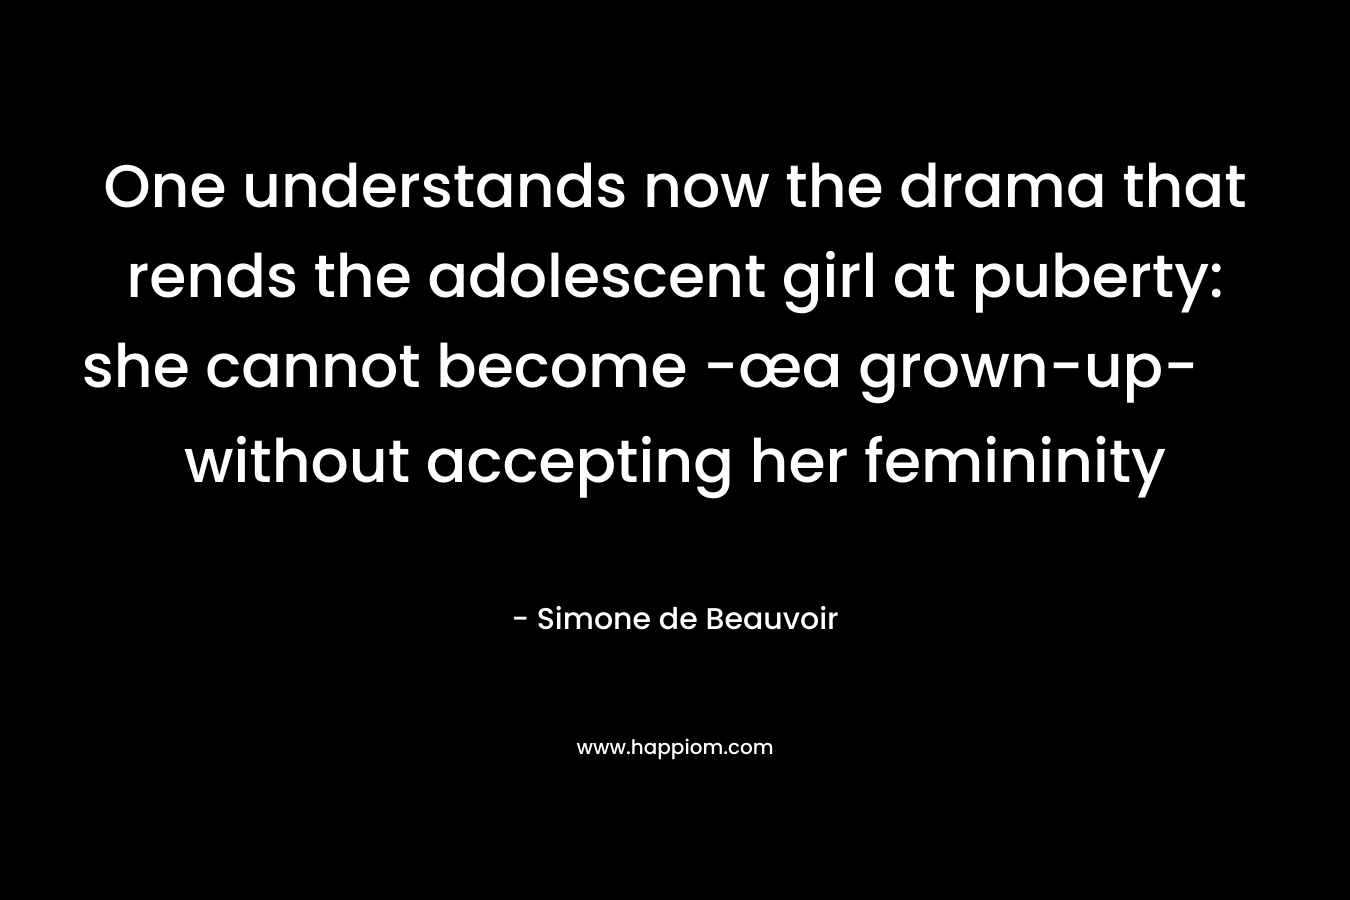 One understands now the drama that rends the adolescent girl at puberty: she cannot become -œa grown-up- without accepting her femininity – Simone de Beauvoir